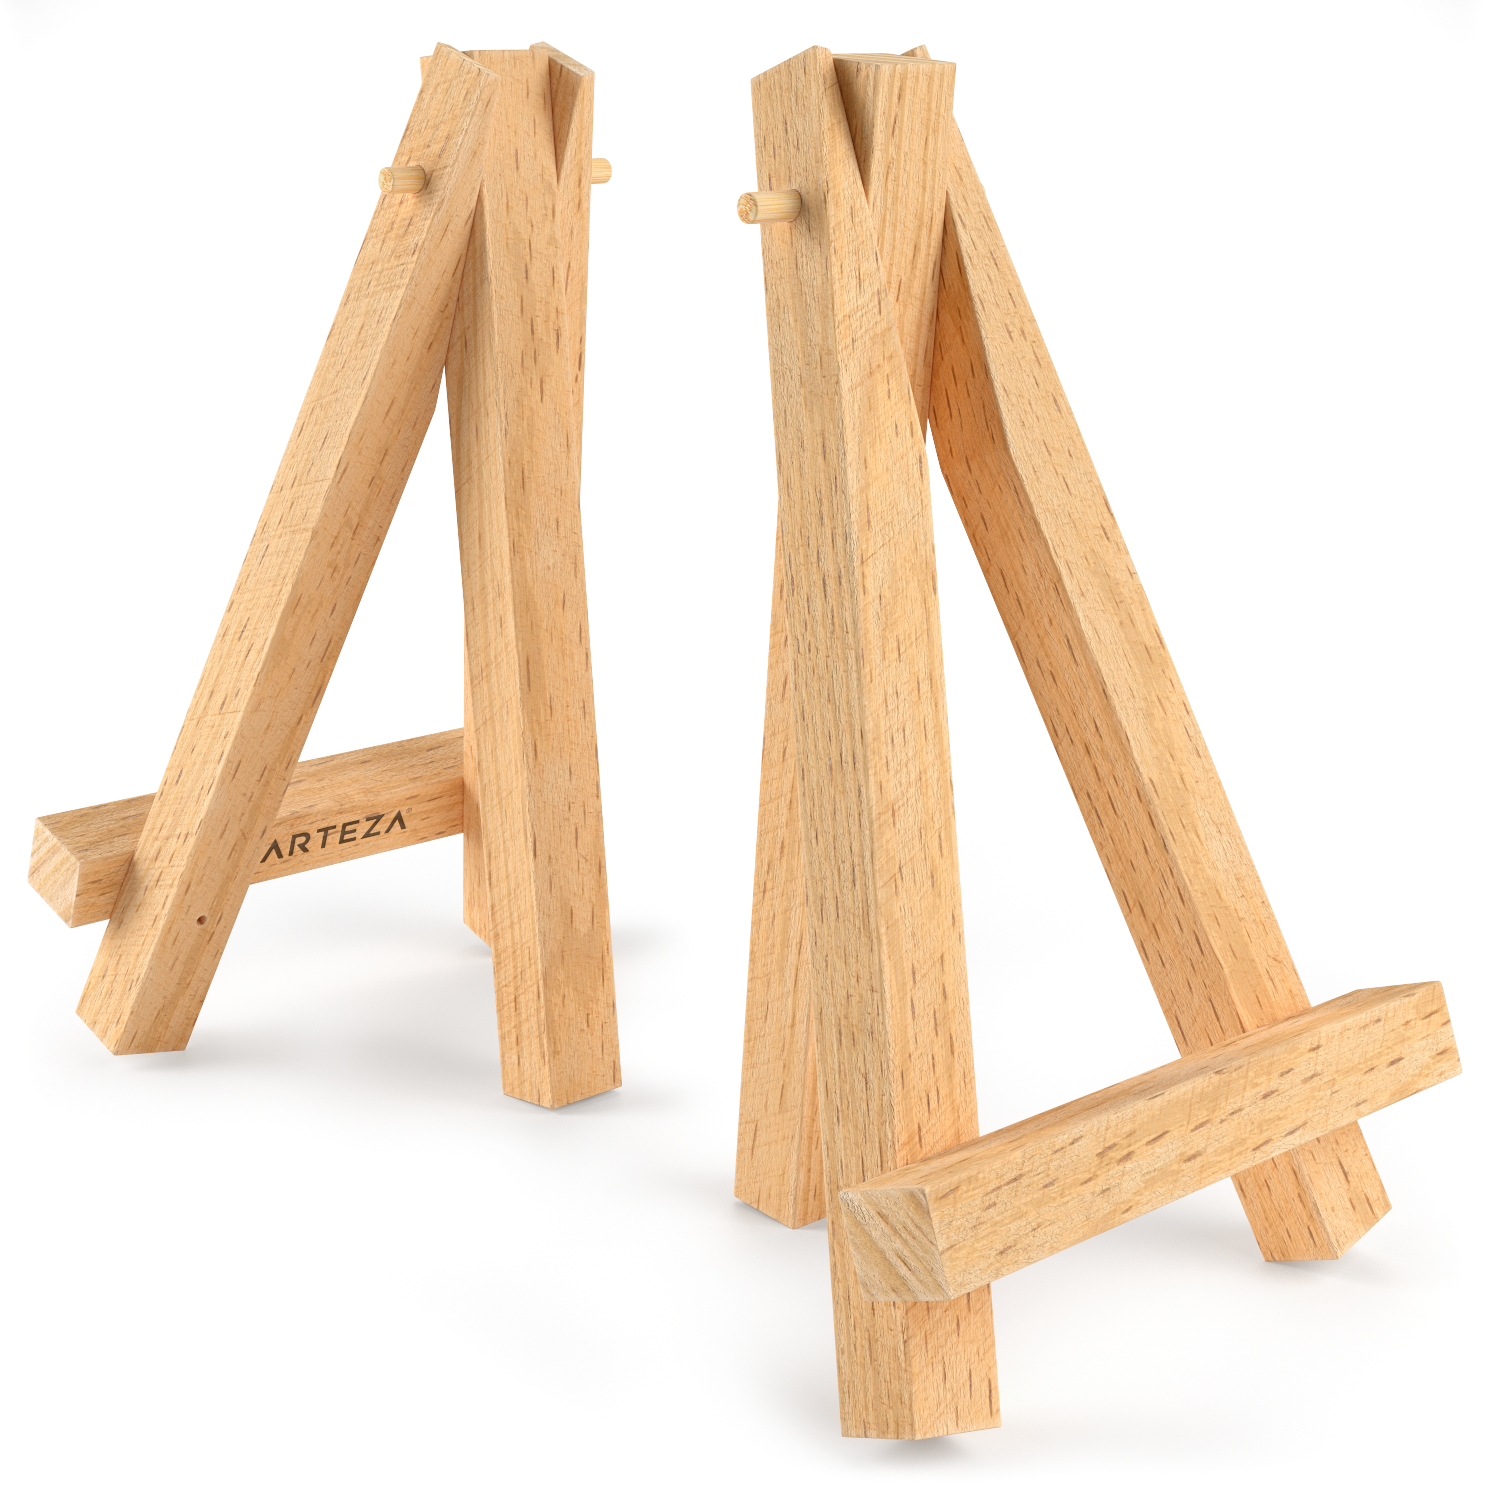  IMIKEYA Mini Wooden Easel 2 Pcs Small Easel Table Top Display  Easel Adjustable Stand Cookbooks Display Rack Mini Display Easel Miniature Easels  Tabletop Easel Stand Set Photo Child : 1: Office Products